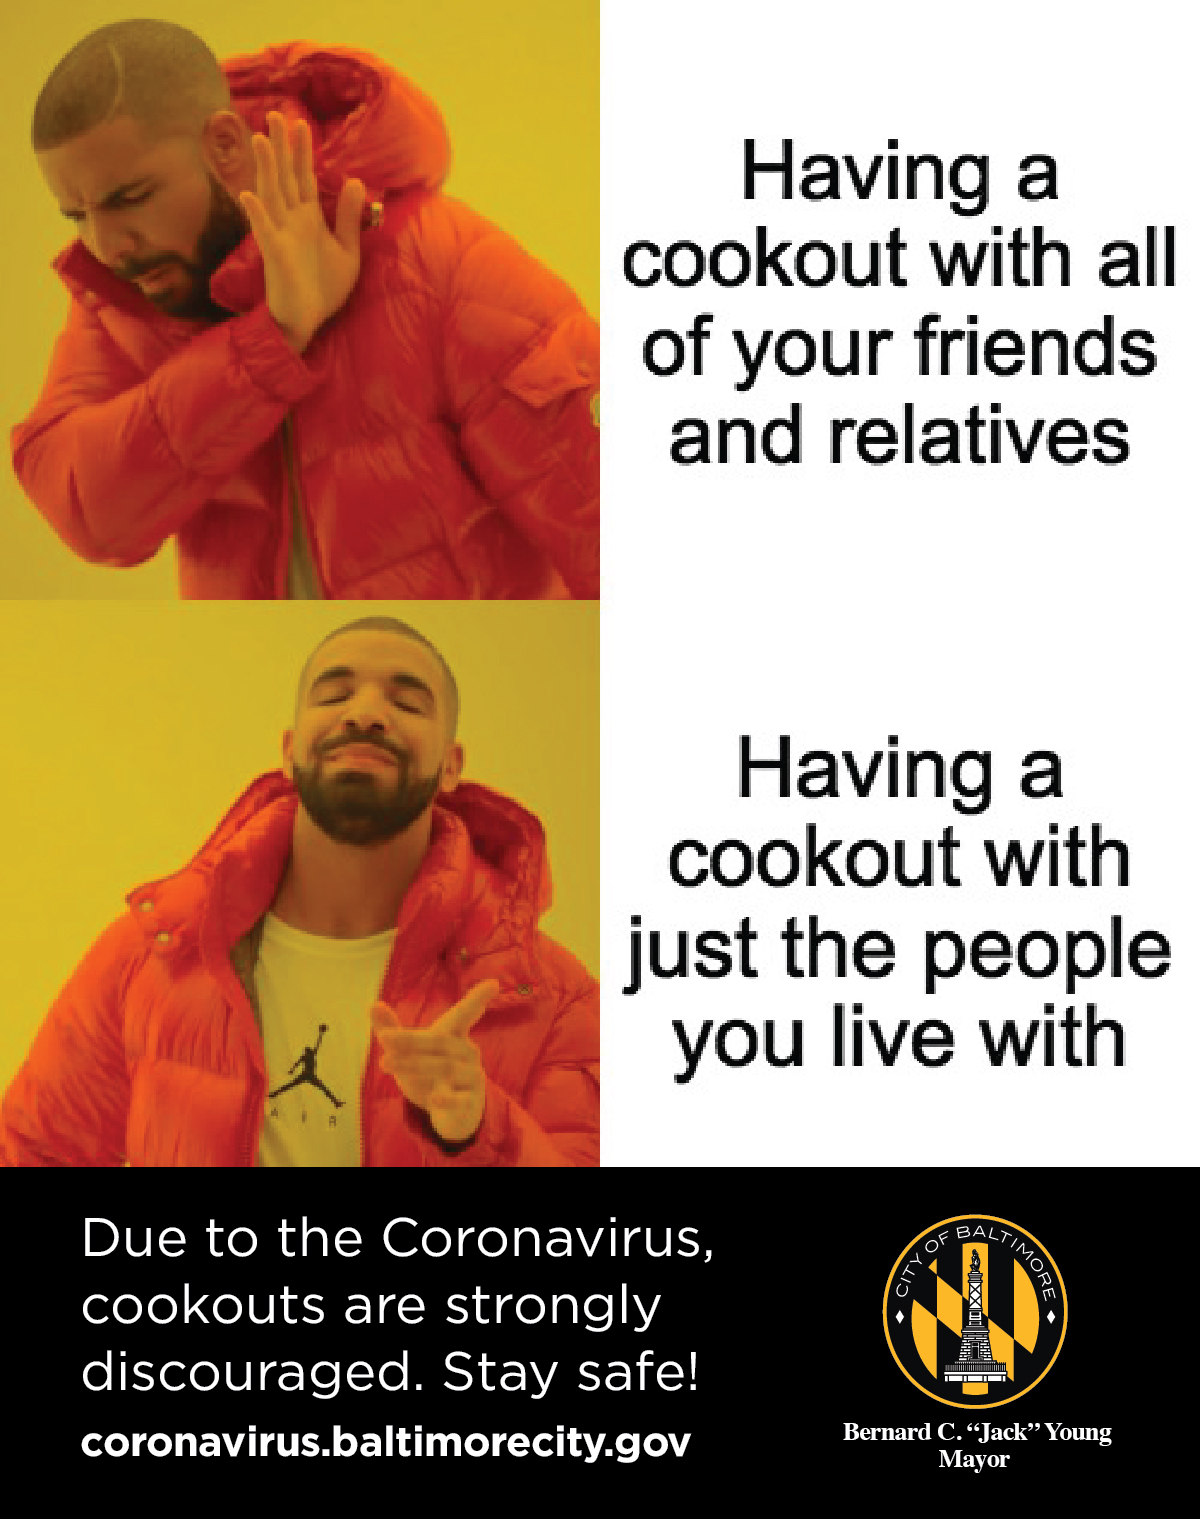 Having a cookout with just the people you live with is ok, not with everyone you know